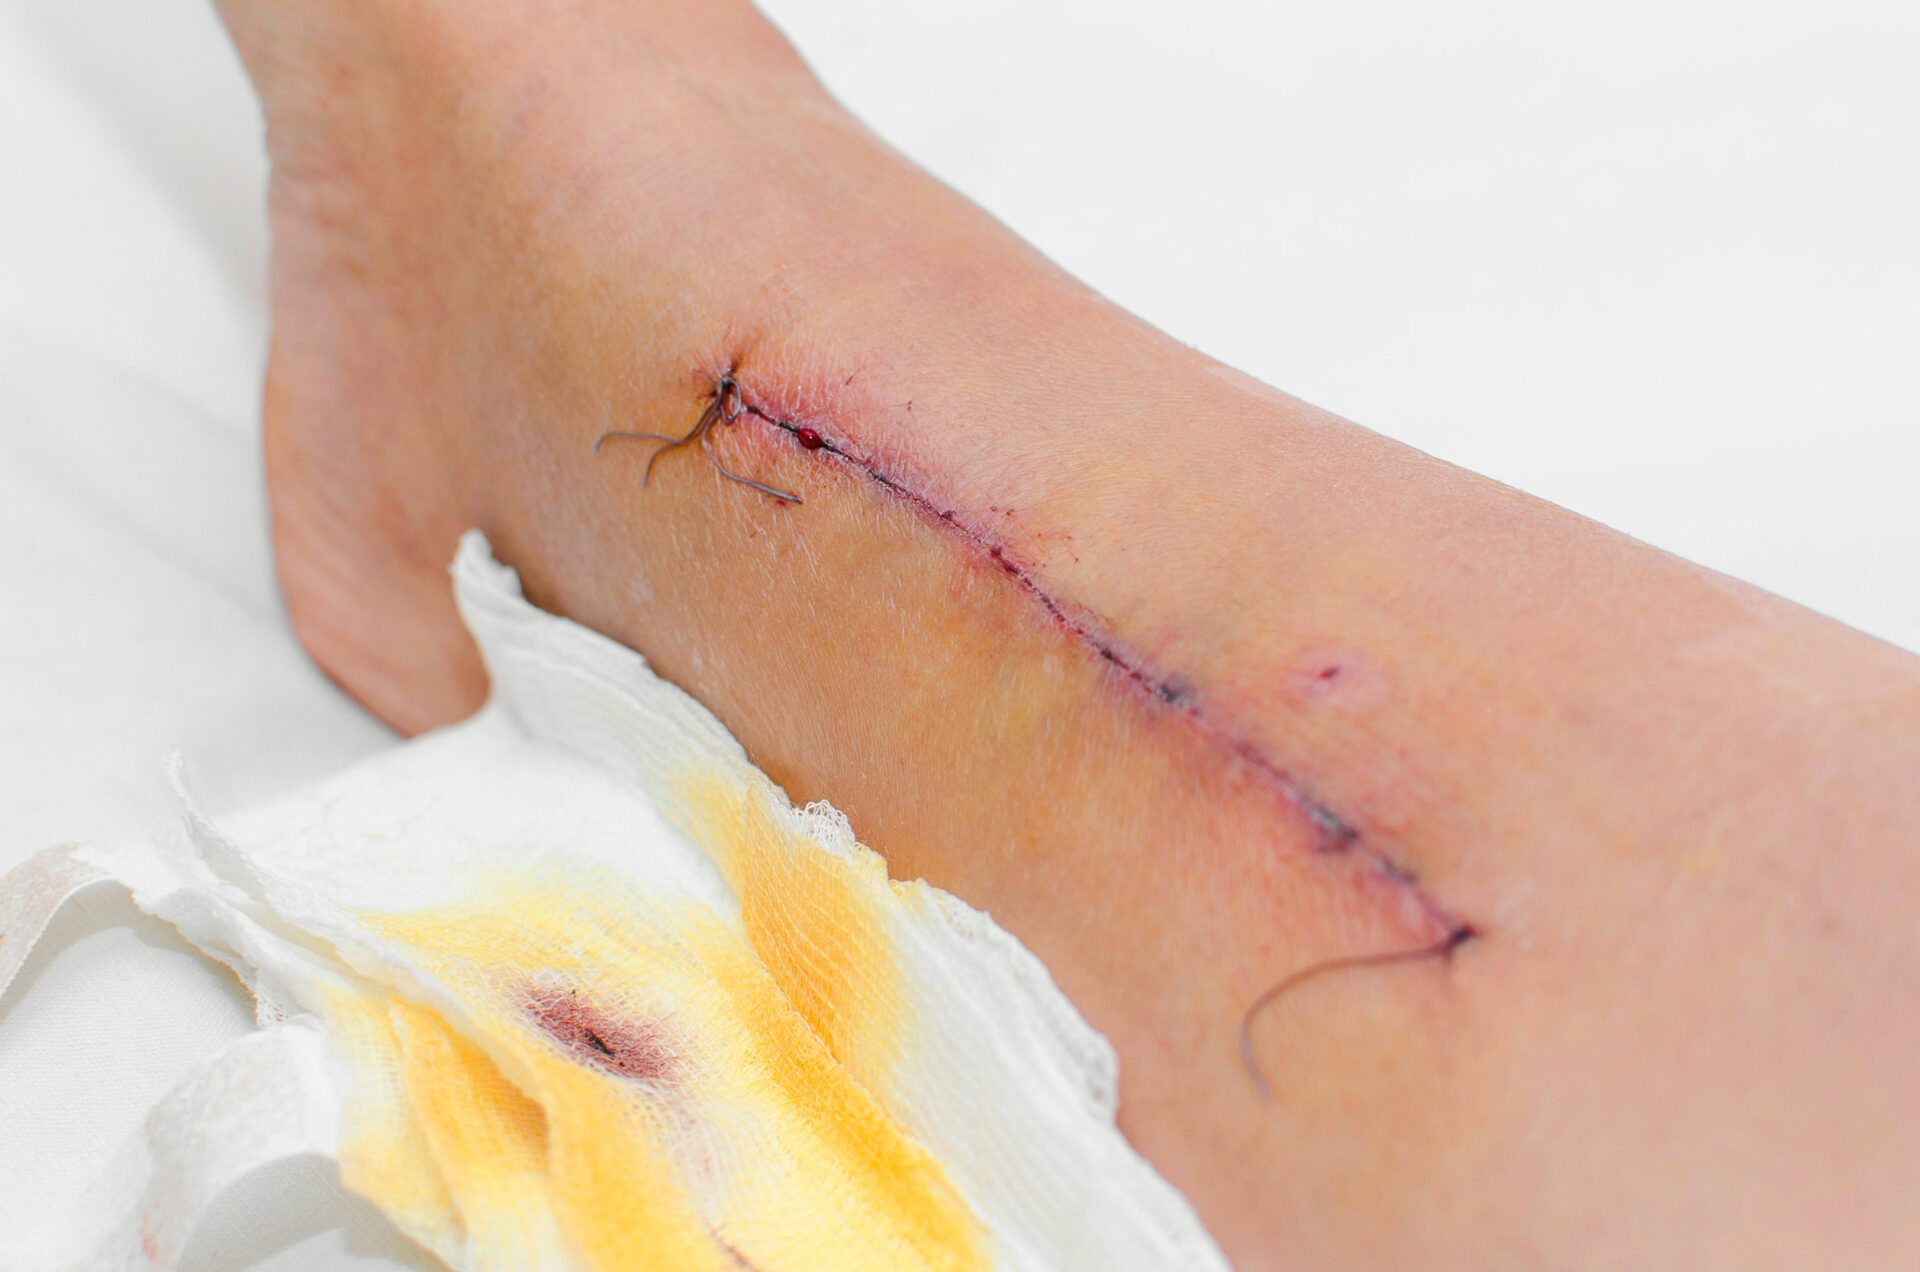 Medical suture on the leg